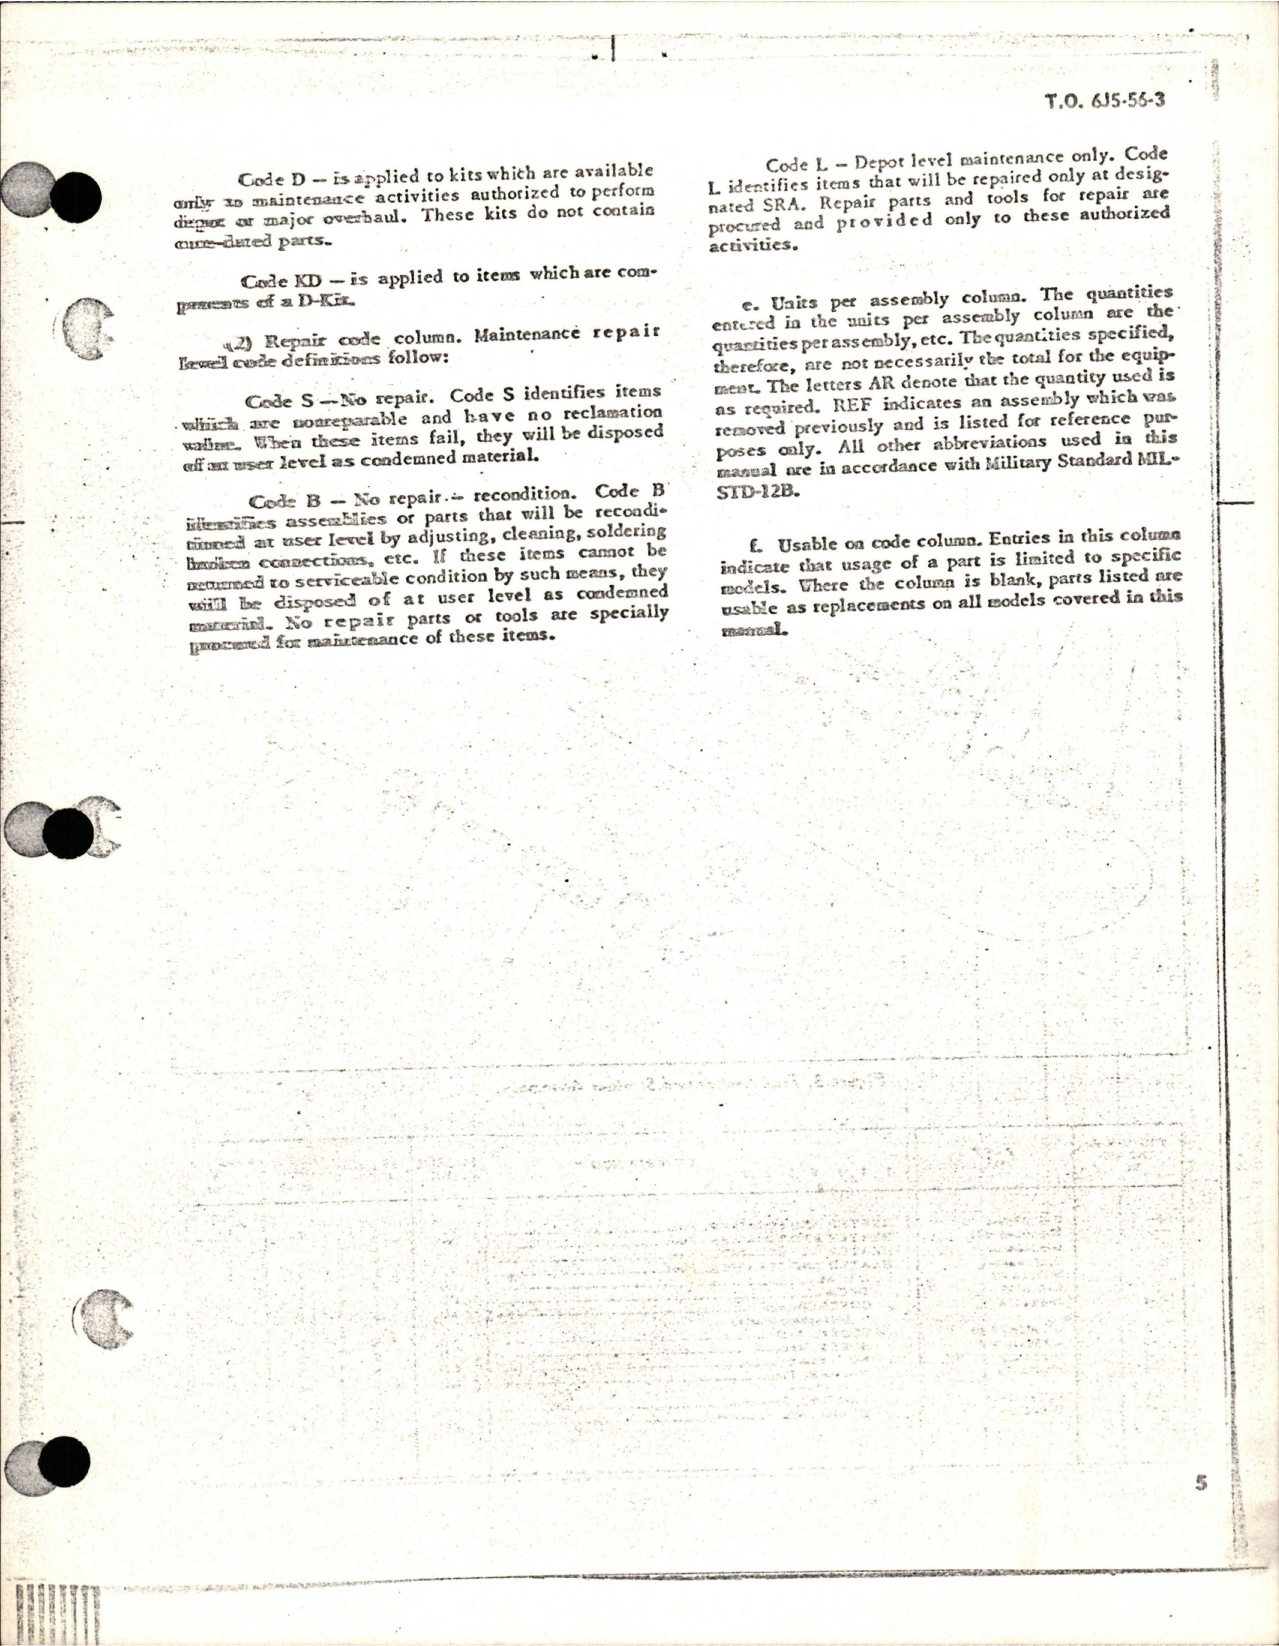 Sample page 5 from AirCorps Library document: Service Instructions with Parts List for Fuel Boost Pump - Part S2818C